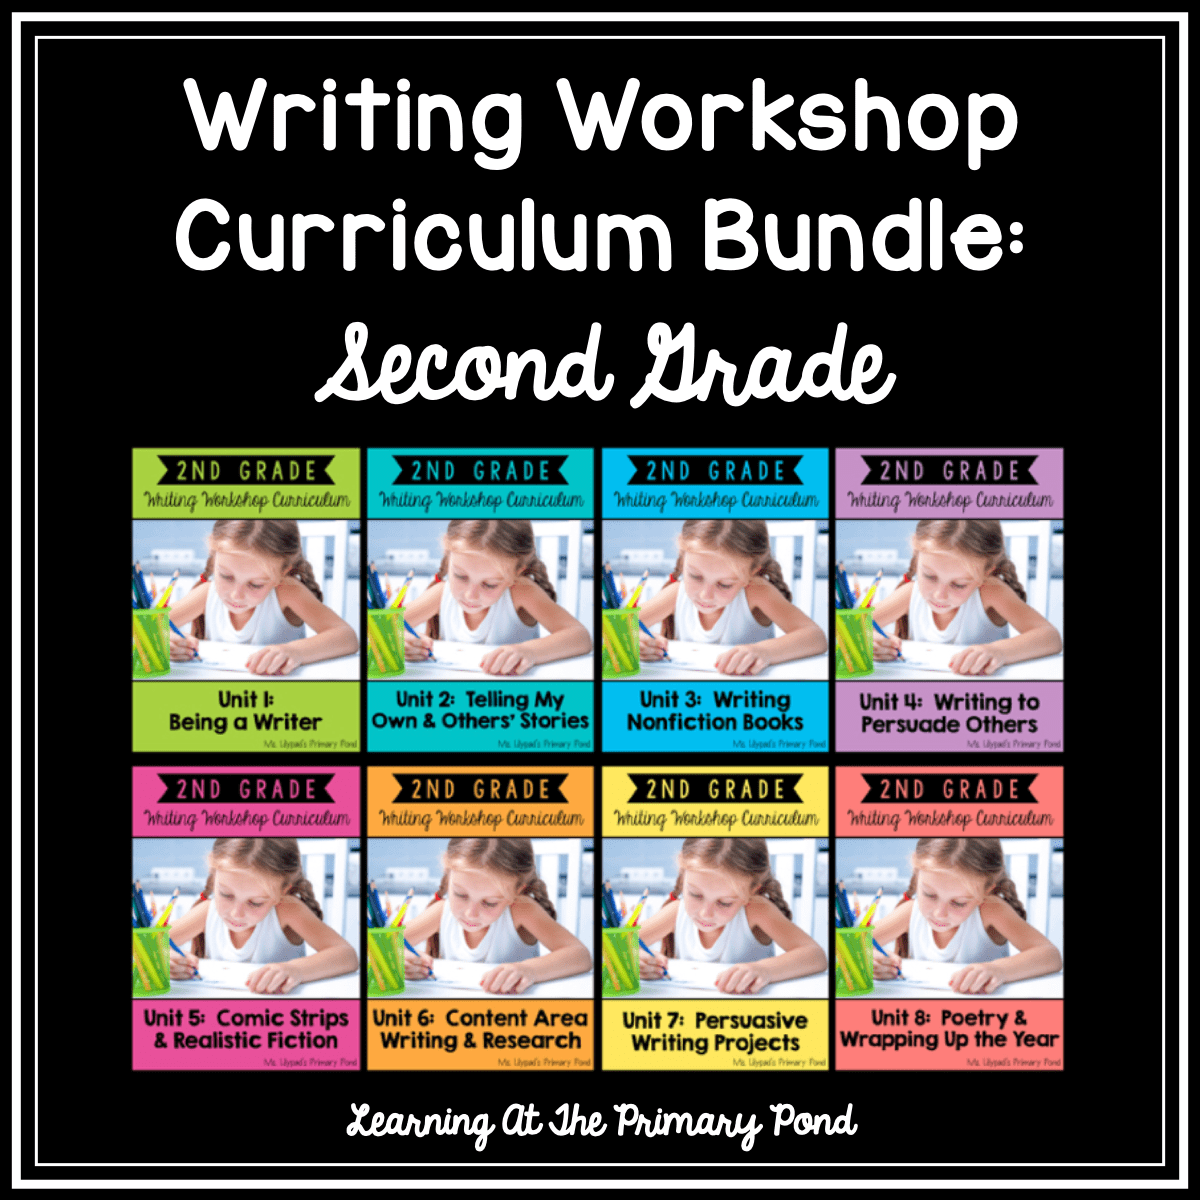 Writing Workshop Curriculum Sale - Second Grade Bundle - learning-at-the-primary-pond